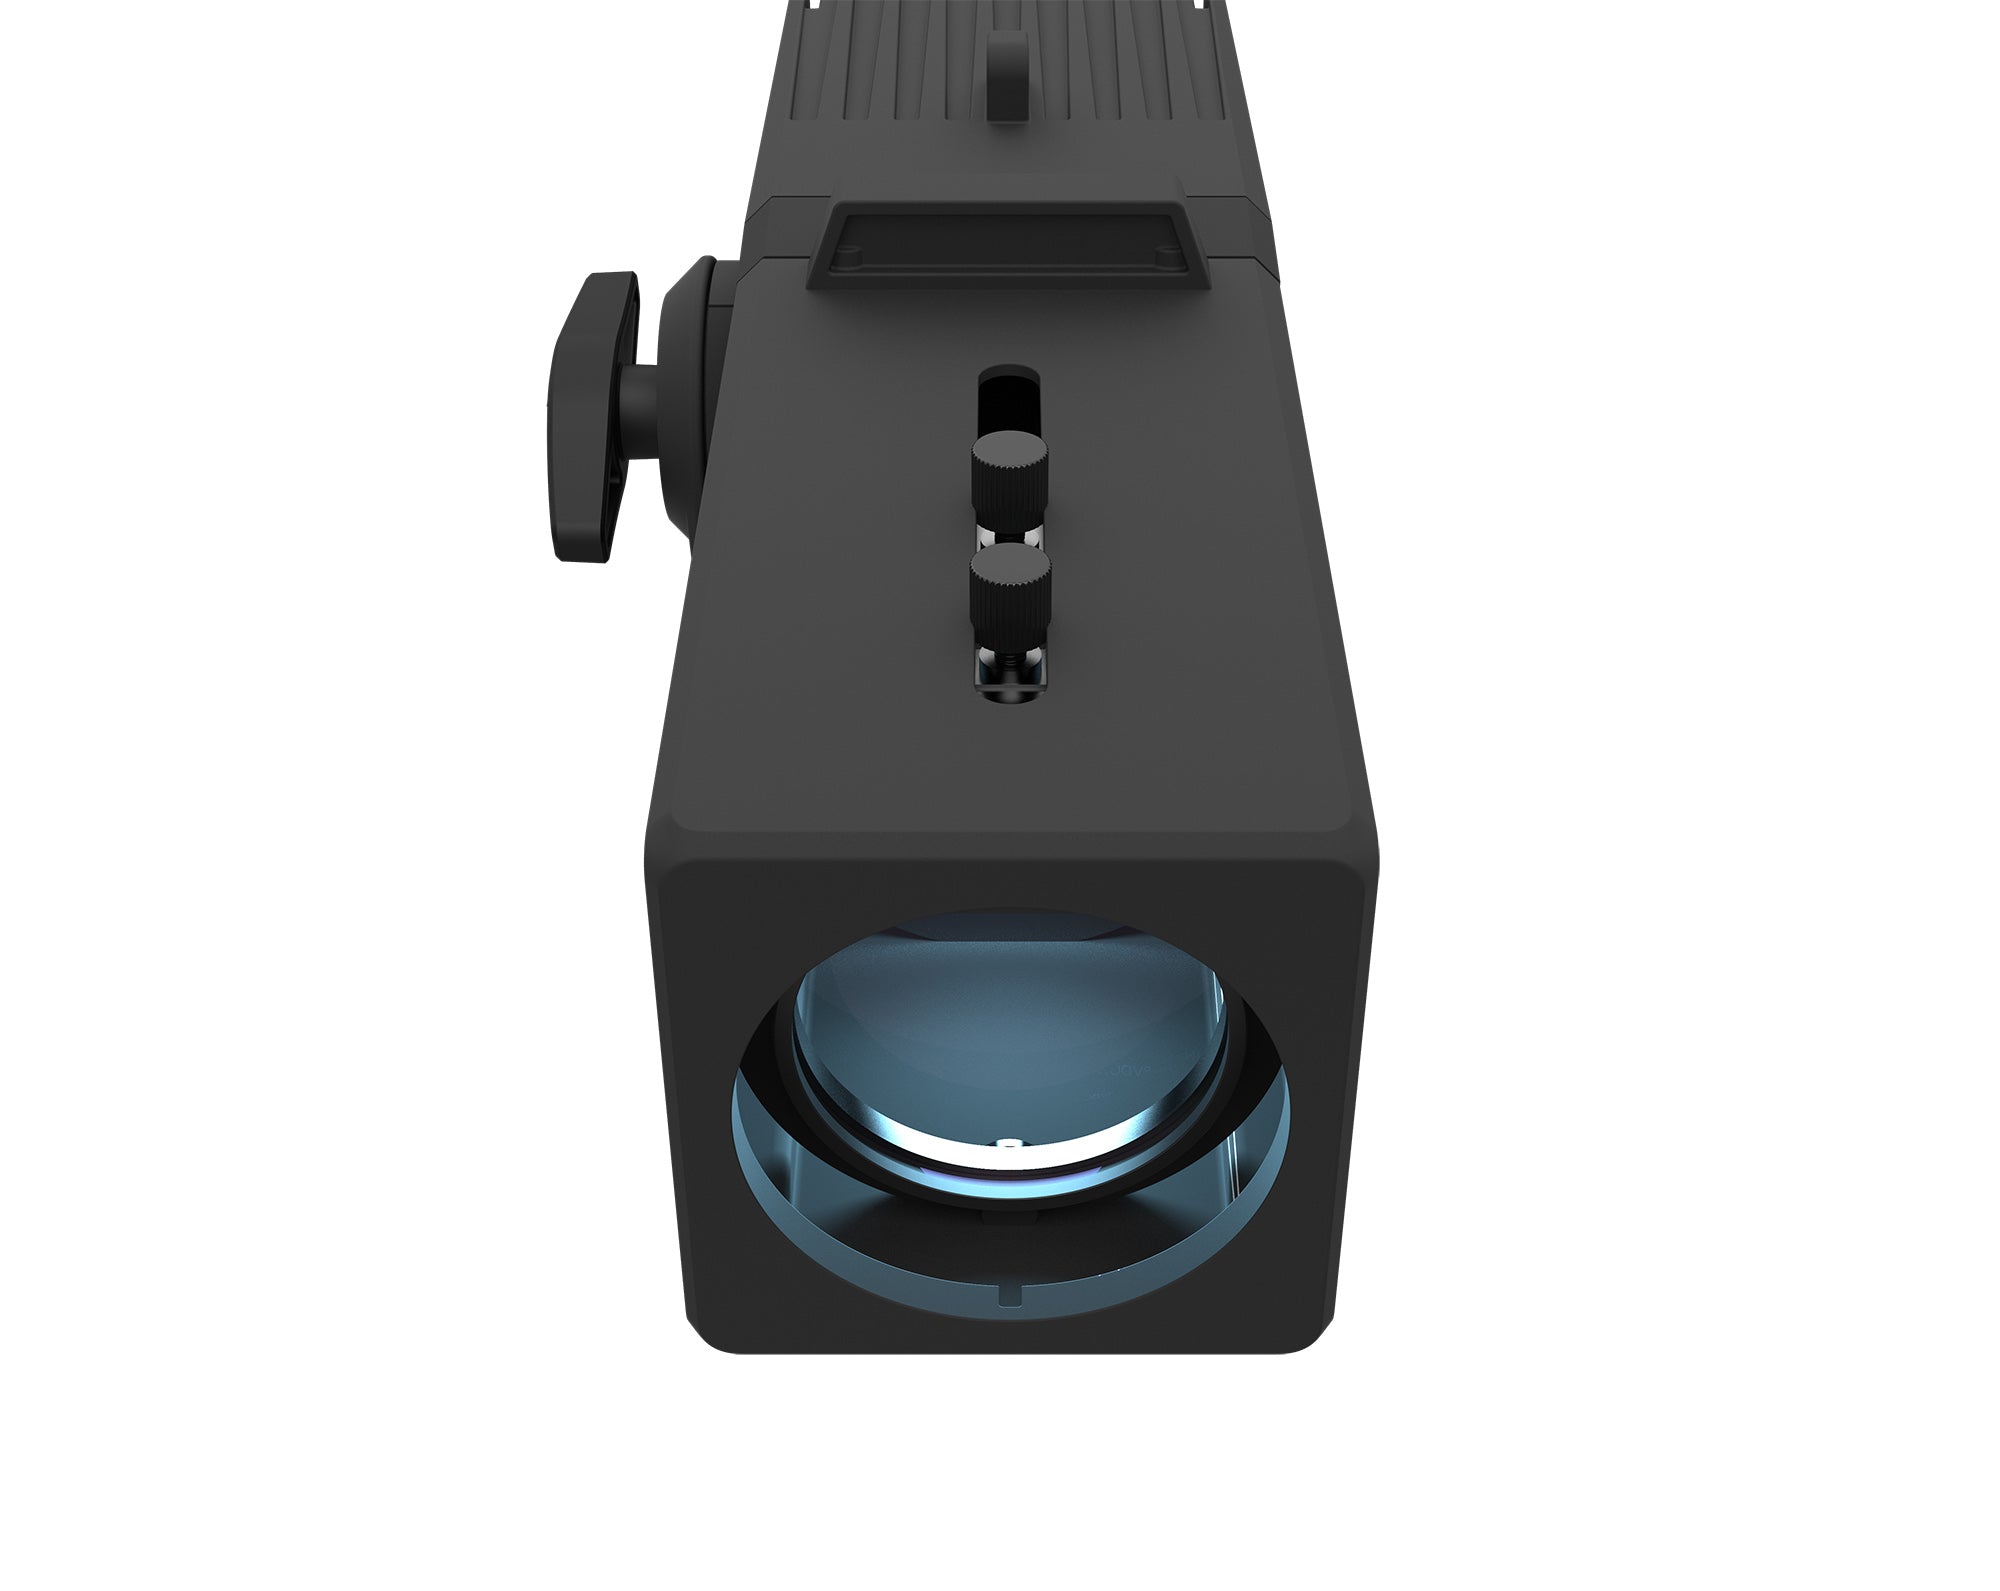 B-Stock: Chauvet DJ Freedom Gobo IP wireless LED Gobo Projector with Built-in D-Fi Transceiver - Hollywood DJ